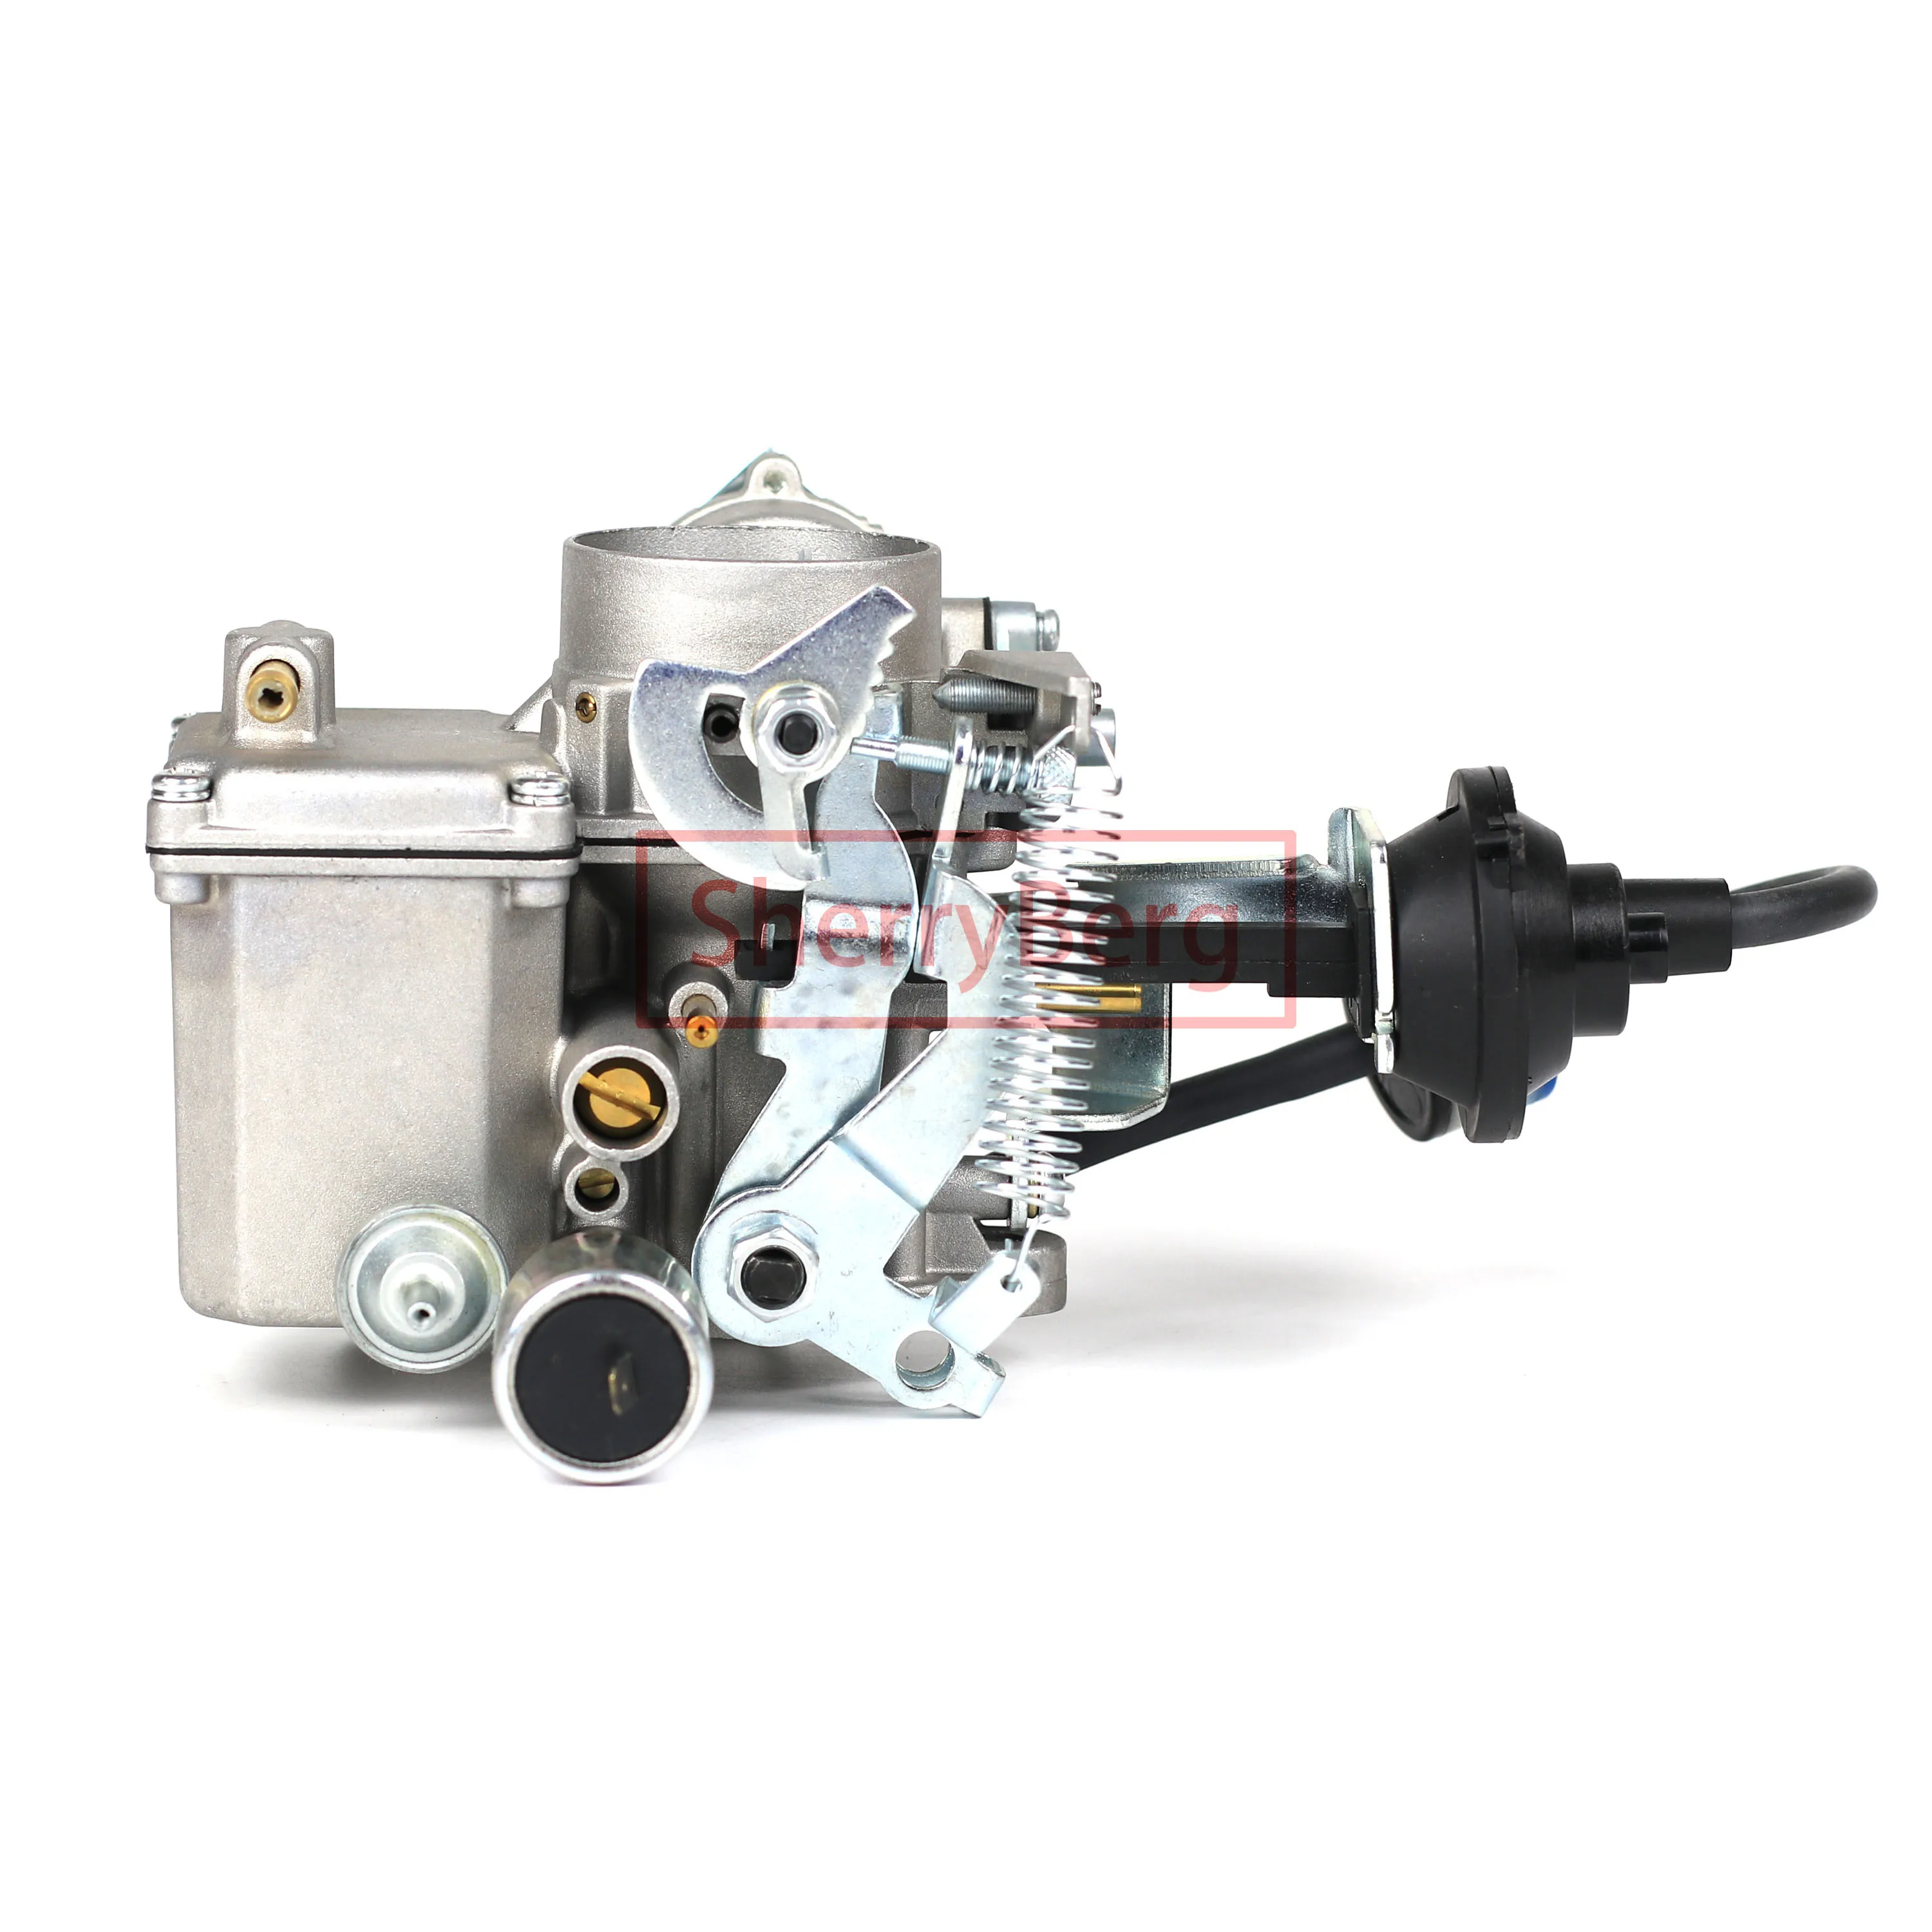 SherryBerg CARBURETOR FOR VW BEETLE 30/31 PICT-3 TYPE 1&2 for BUG BUS GHIA  113129029A H30/31 pict solex brosol carburettor carb - AliExpress